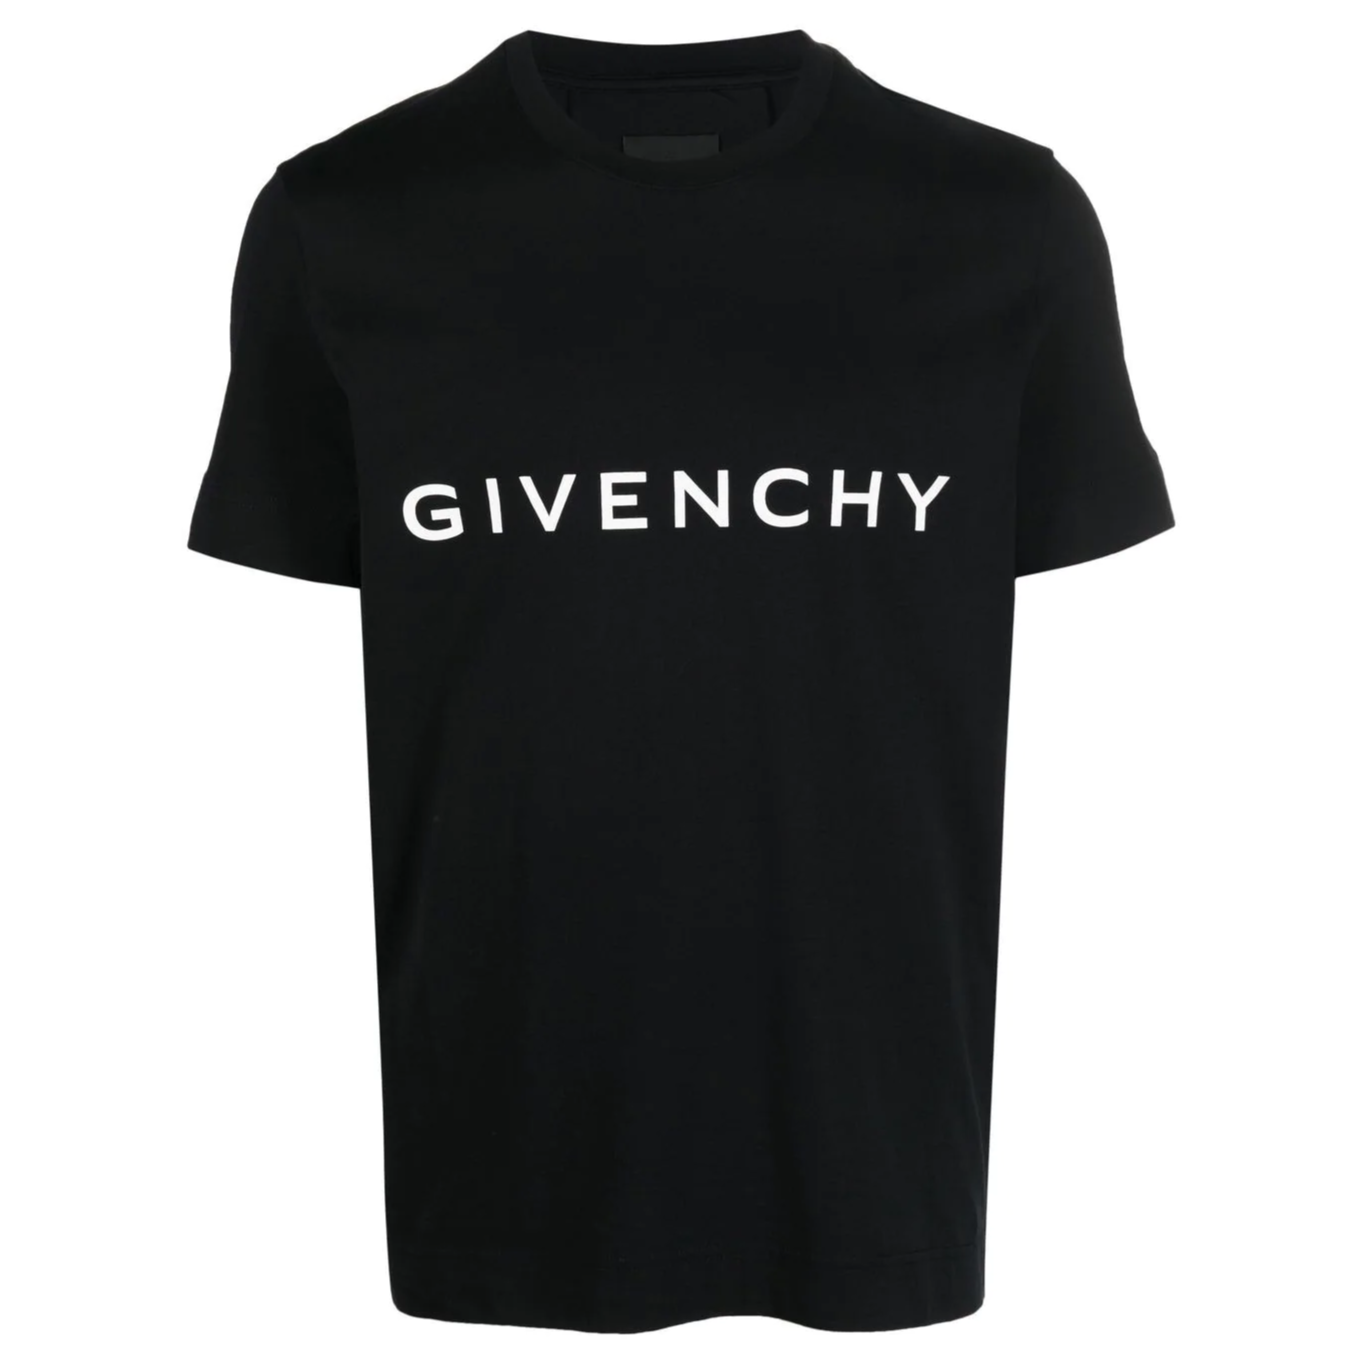 Total 87+ imagen how much is a givenchy t shirt